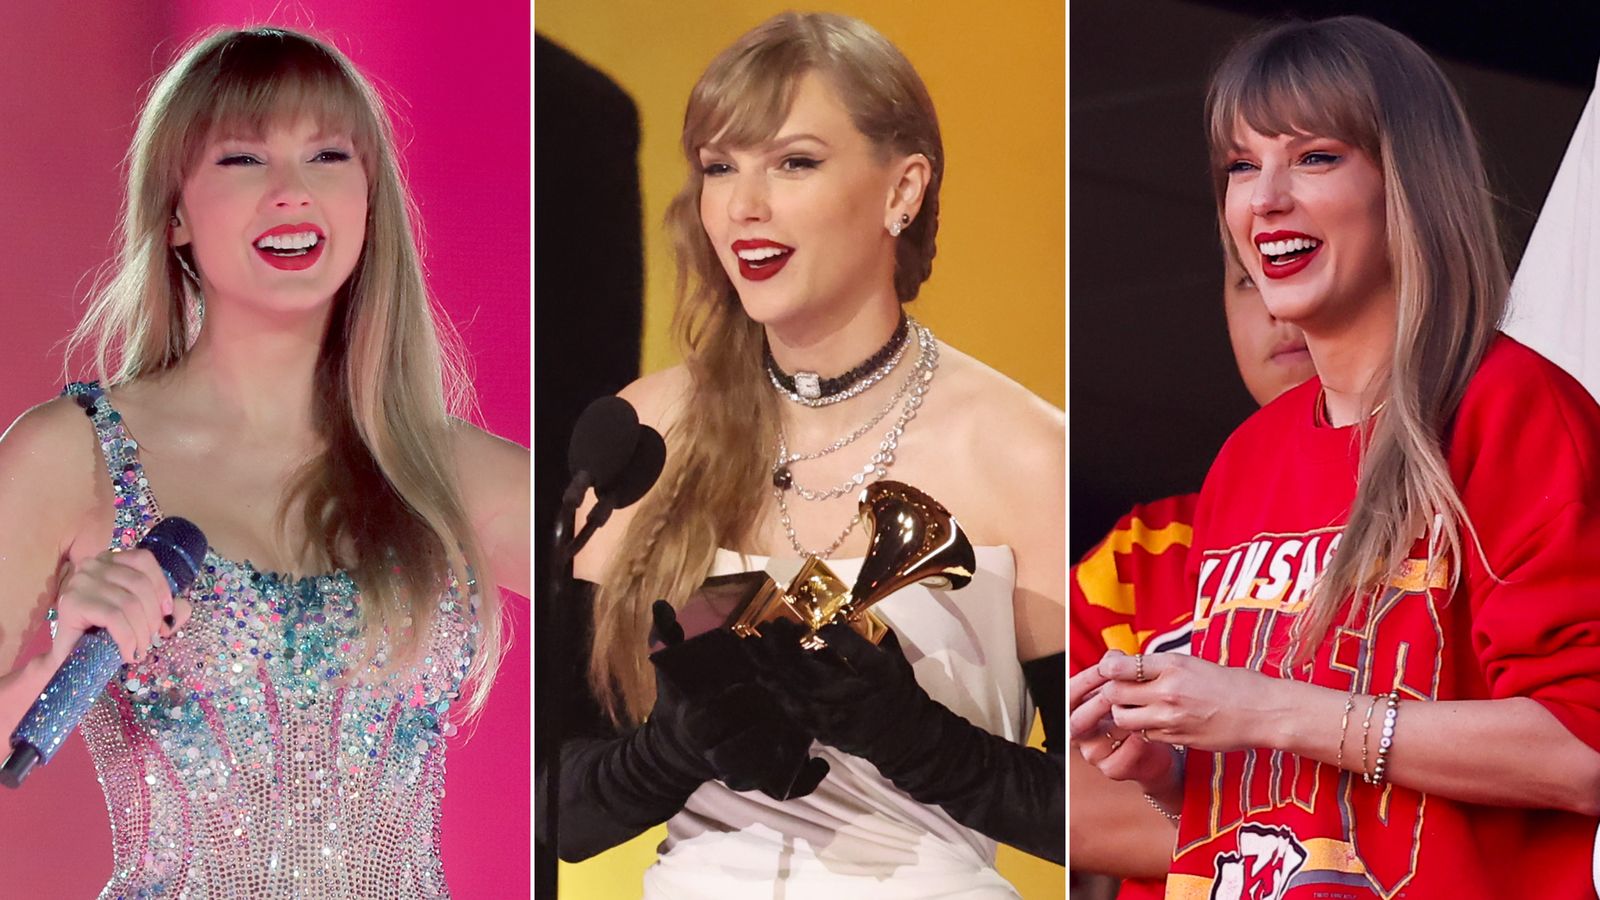 There are many different incarnations of Taylor Swift. But is it all too much Taylor?